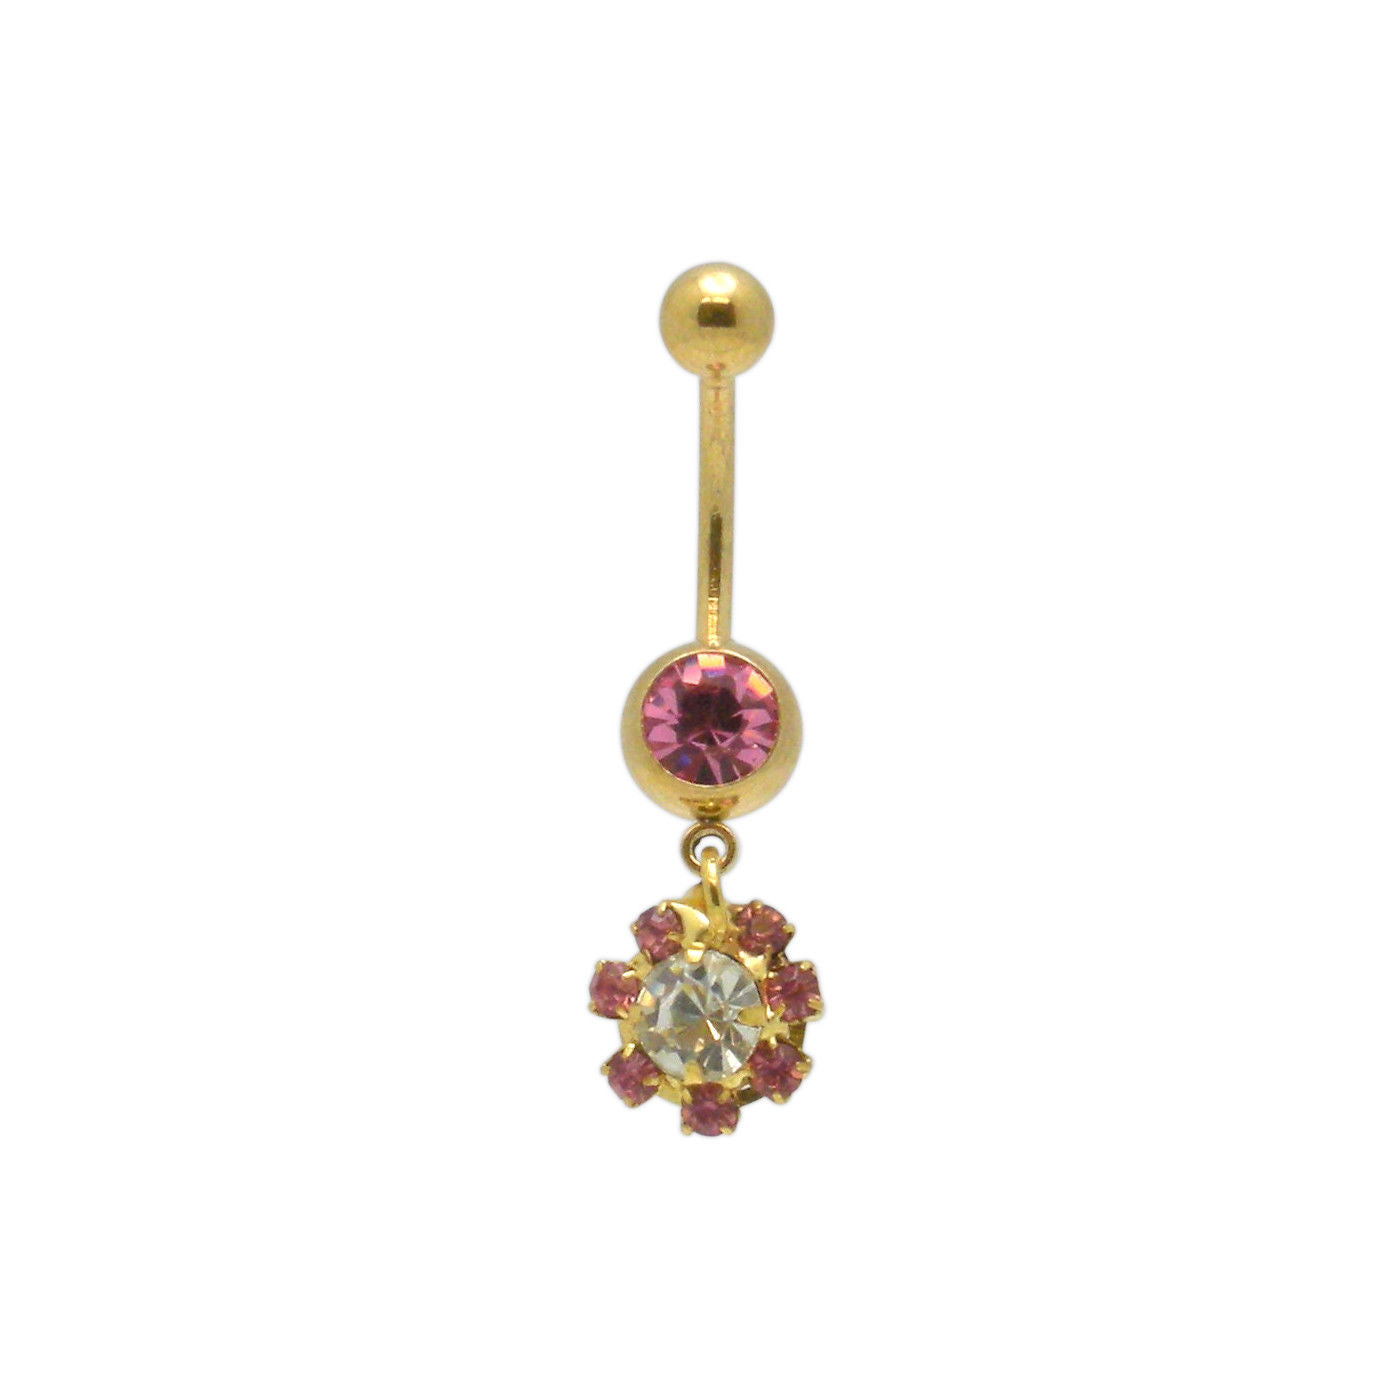 Gold Color Jeweled Flower Belly Ring Navel Barbell Jewelry 14G Surgical Steel